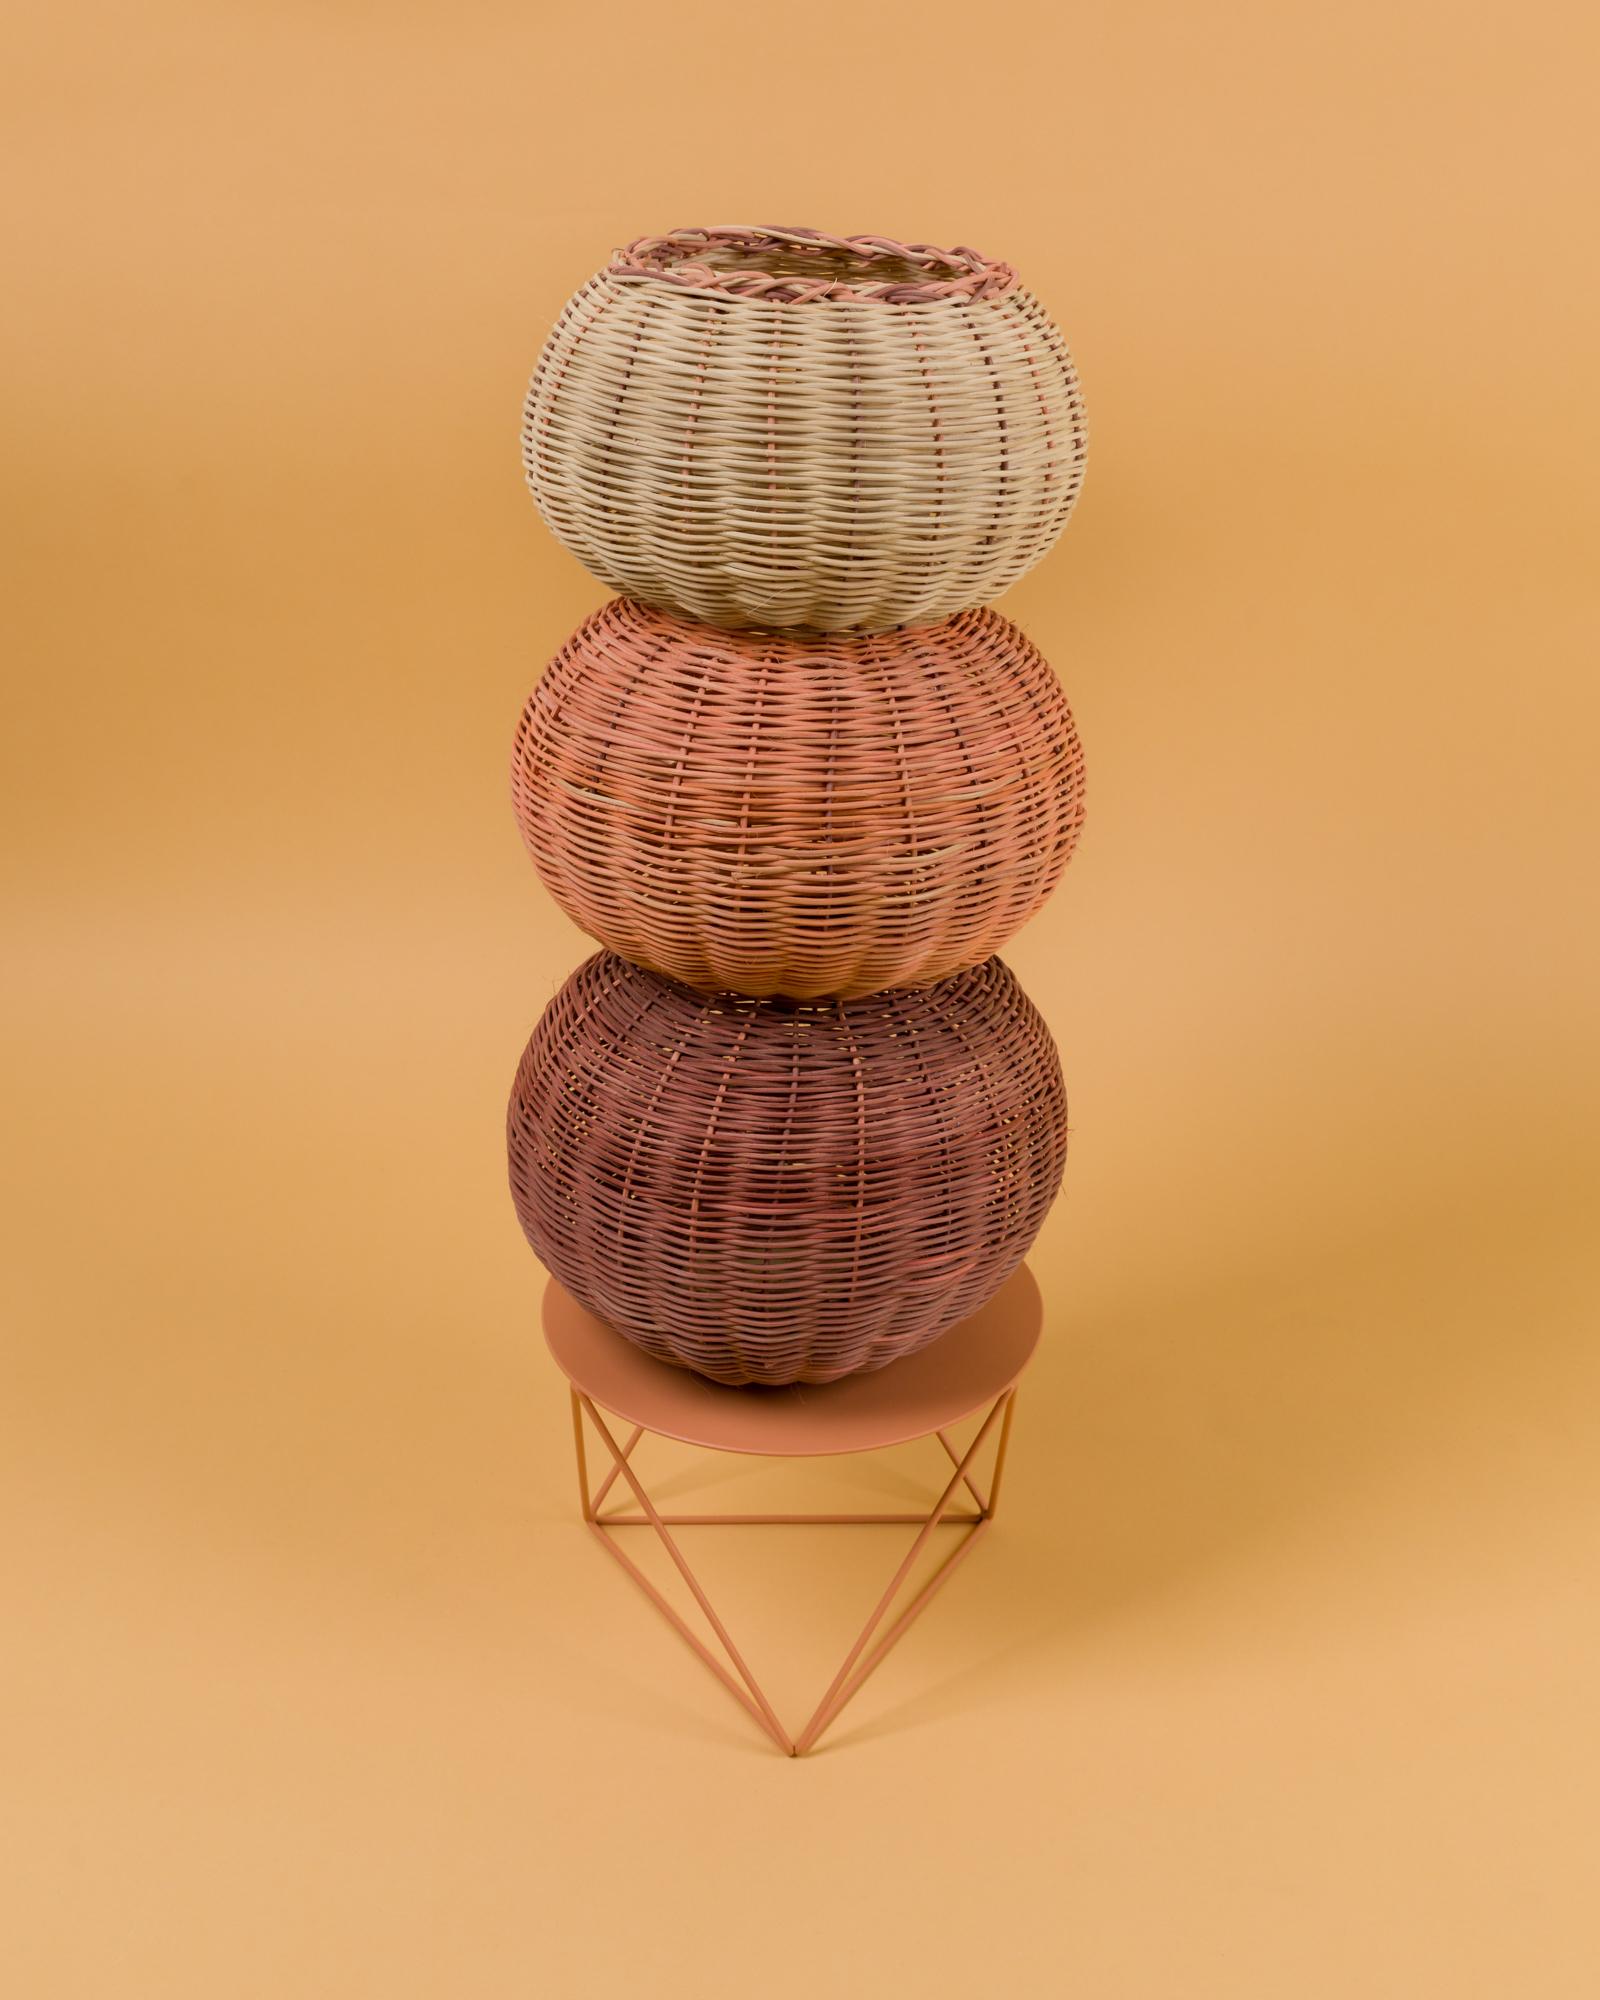 The scoops woven vessel is hand dyed and woven with reed in our Chicago studio. Inspired by forms in ancient Greek ceramics, the material language of this vessel brings together the rich craft history of weaving with 3 dimensional form.

Measures: